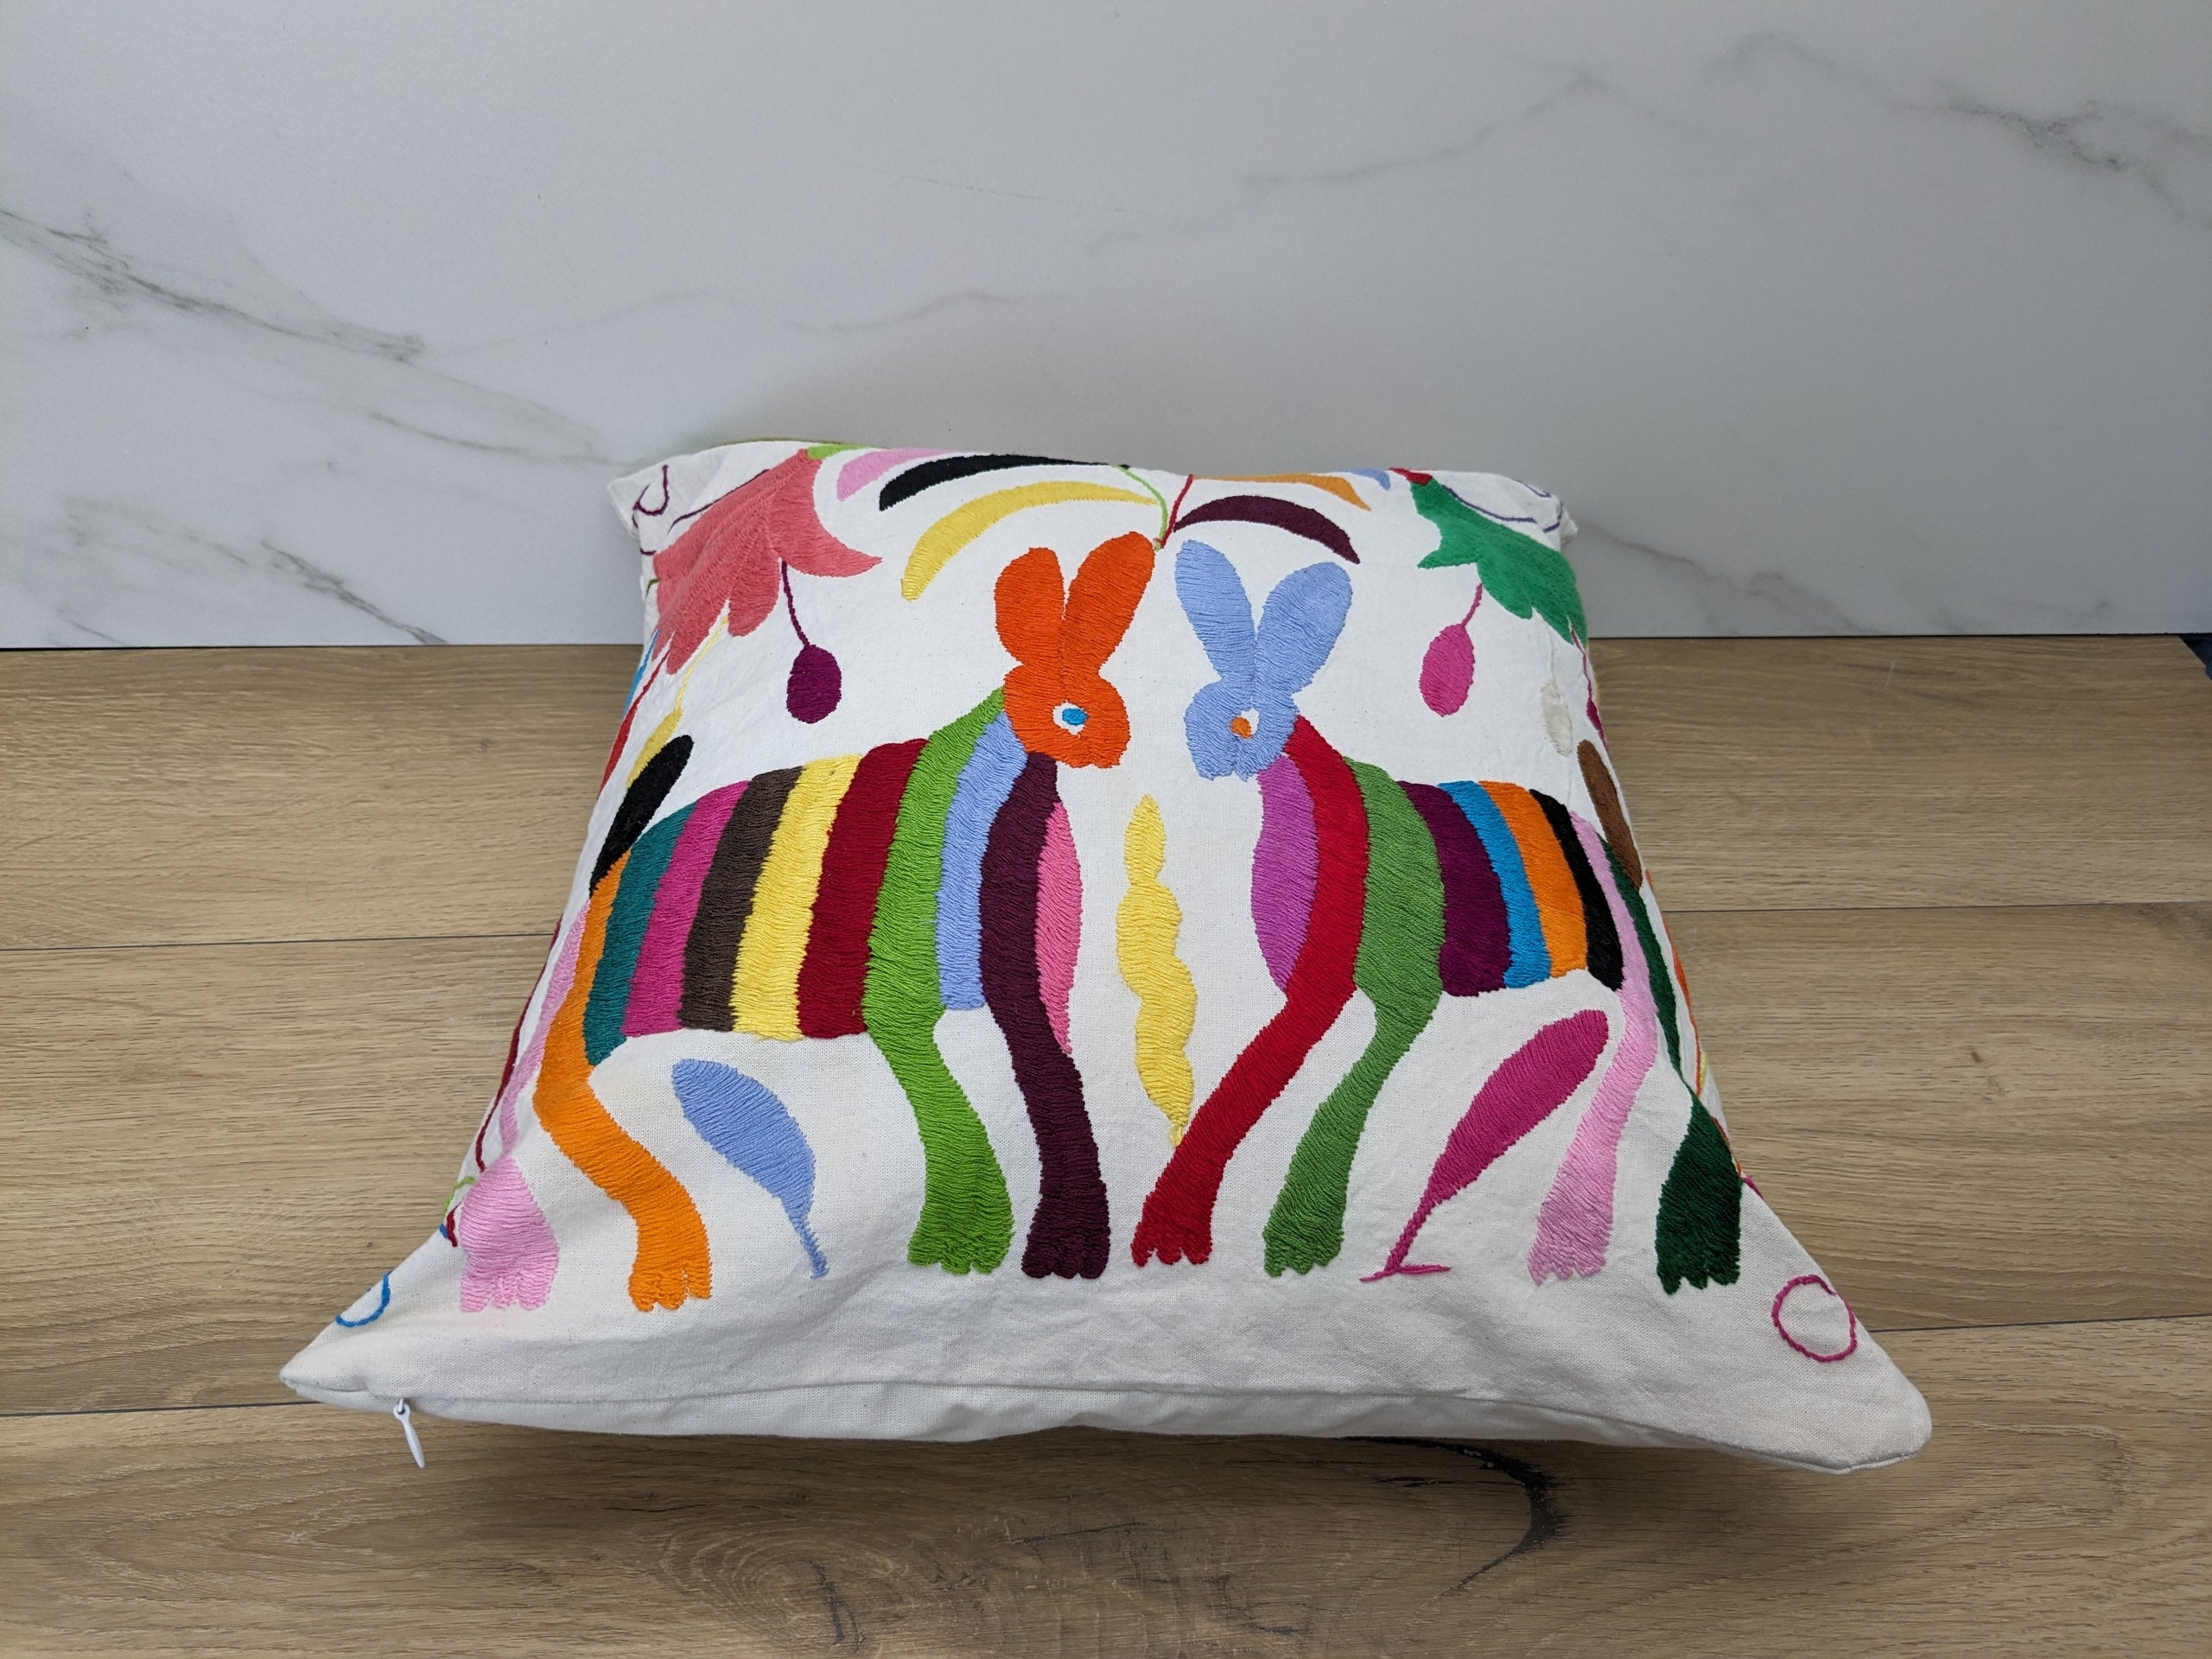 Multicolor Mexican Embroidered Throw Pillow Cover with Animals and Flowers. Handmade in Mexico. We package and ship from the USA. Buy now at www.felipeandgrace.com.